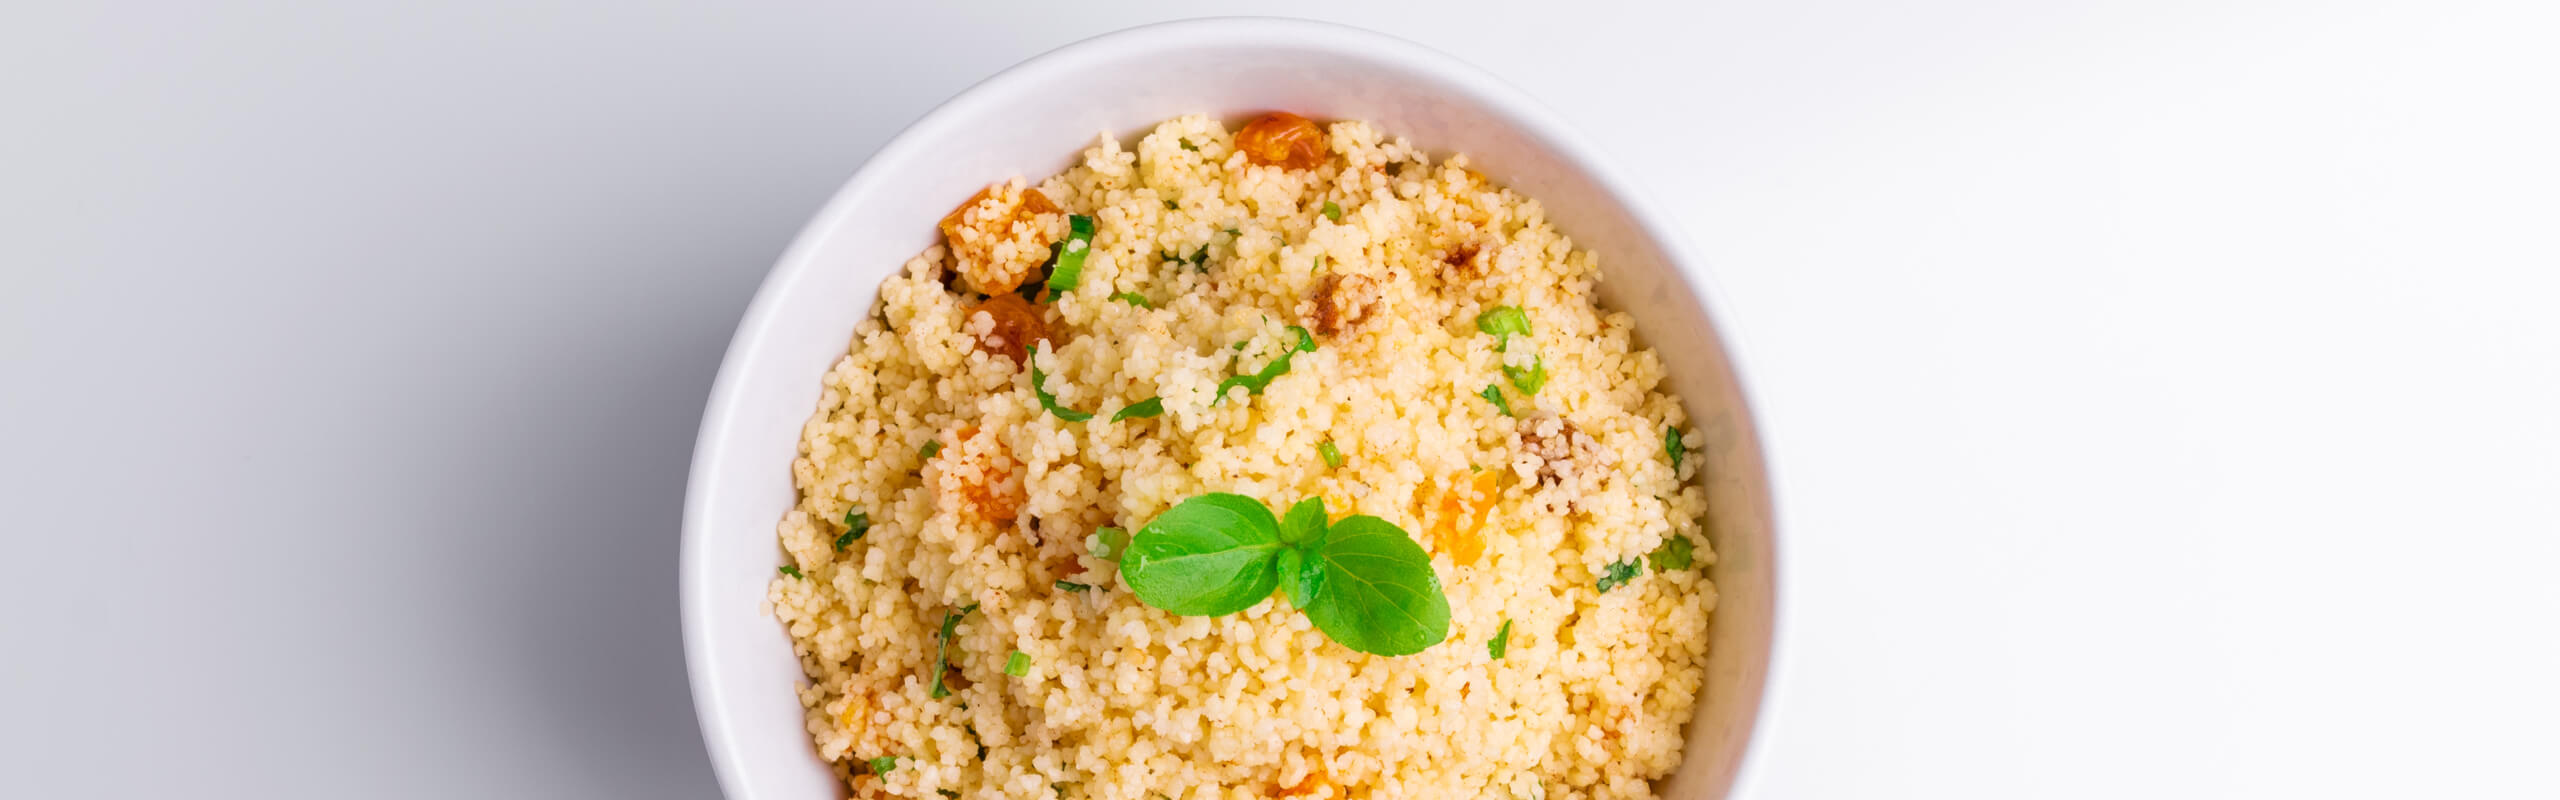 Feature Image: Zucchini, Carrot, and Curry Couscous